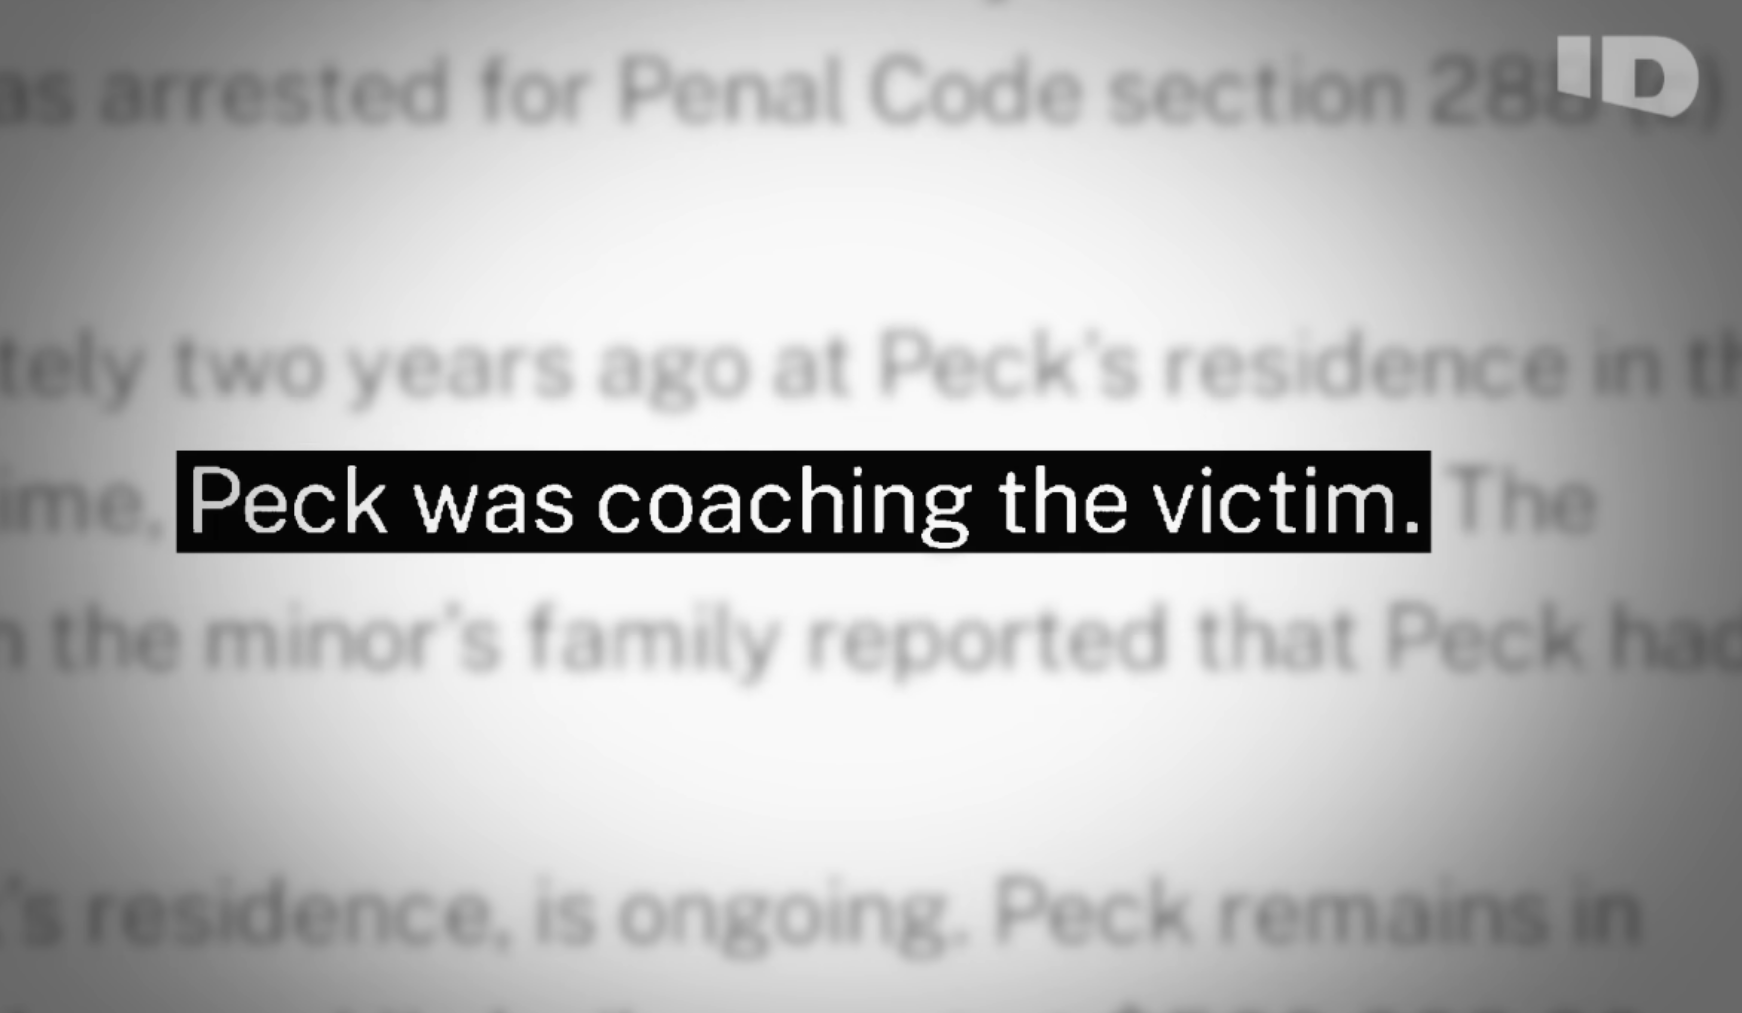 Document excerpt highlighting &quot;Peck was coaching the victim&quot; in a legal context